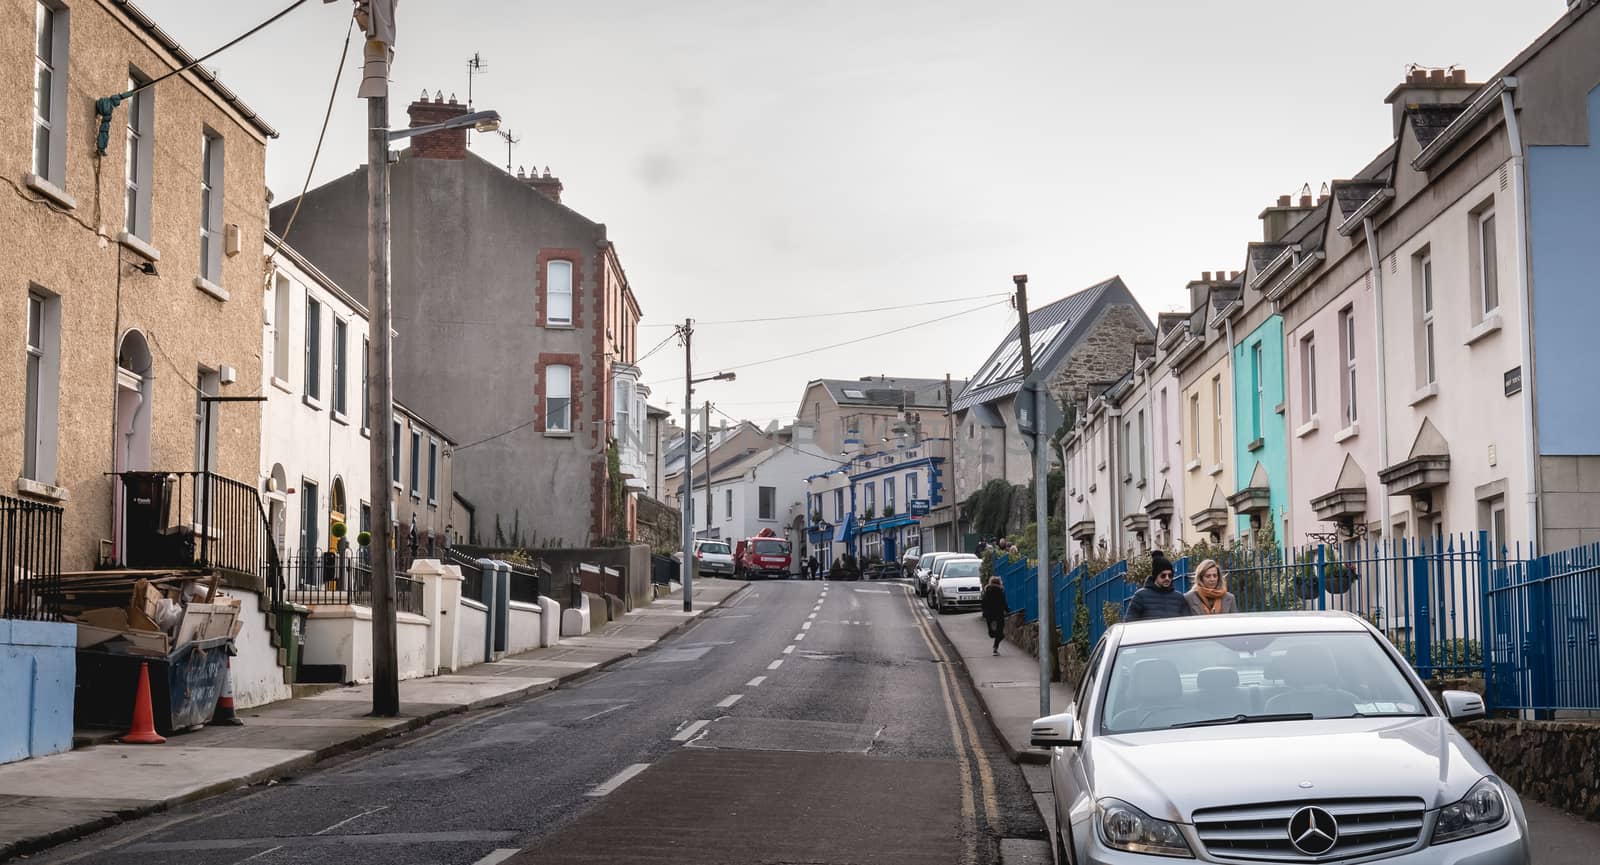 Typical architecture of town center houses of Howth, Ireland by AtlanticEUROSTOXX